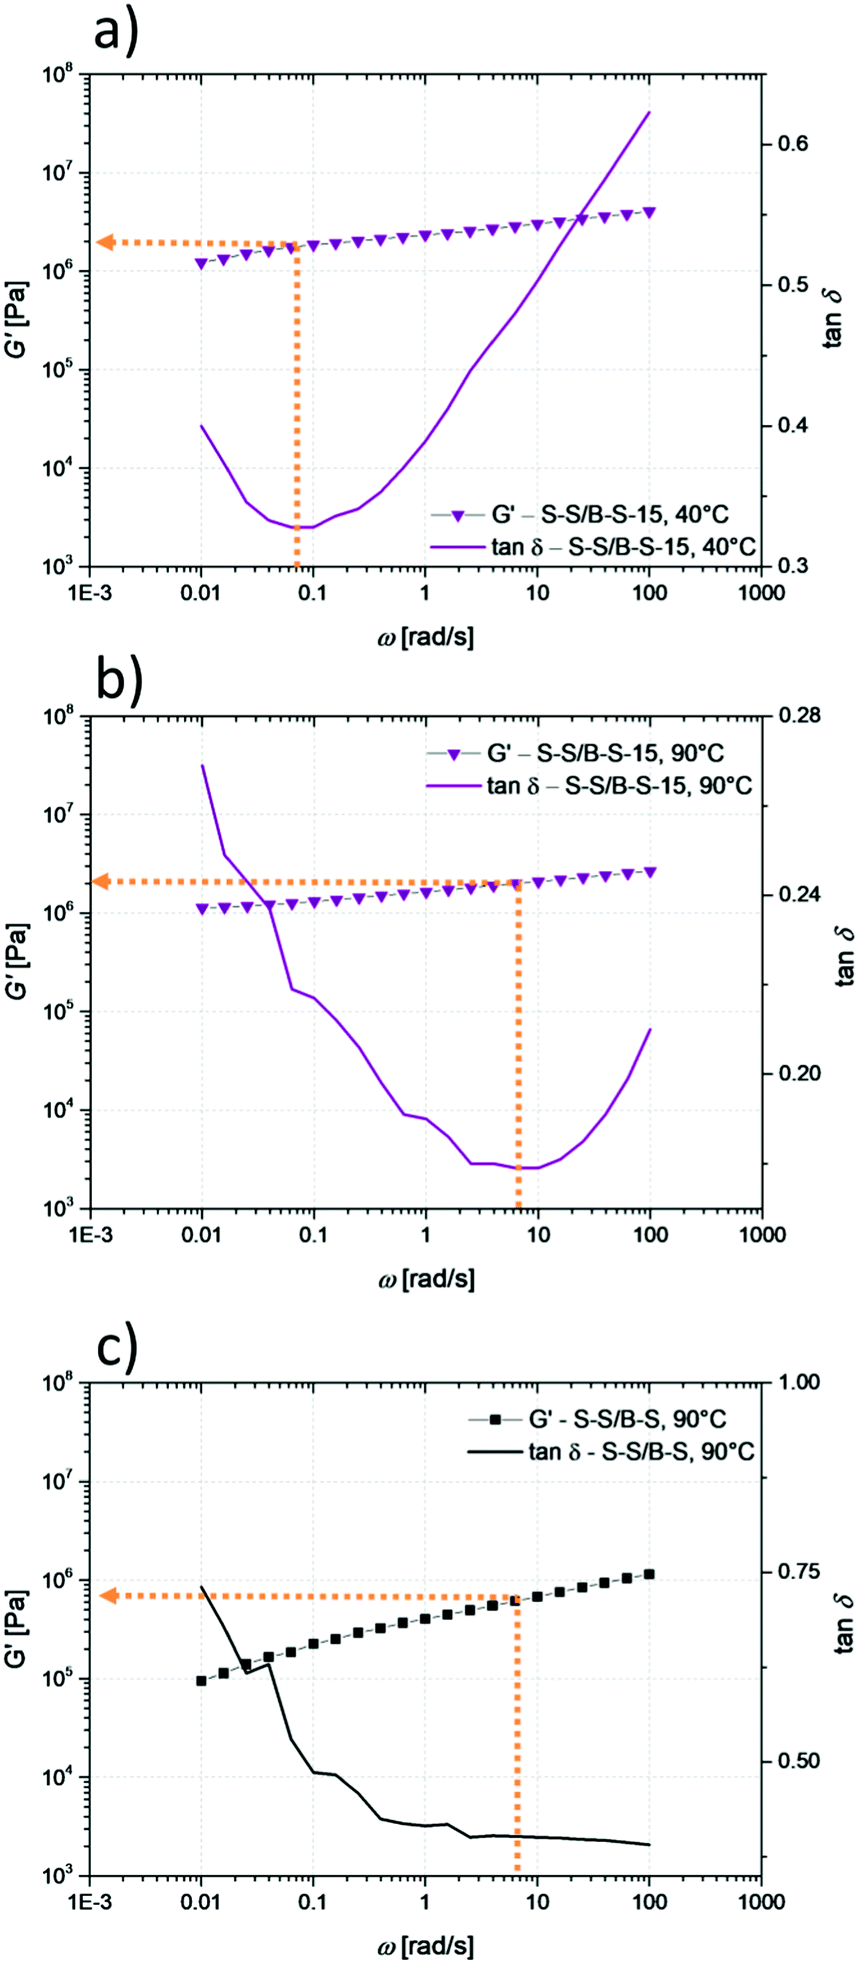 Hydrogen Bonding And Thermoplastic Elastomers A Nice Couple With Temperature Adjustable Mechanical Properties Soft Matter Rsc Publishing Doi 10 1039 C8smg